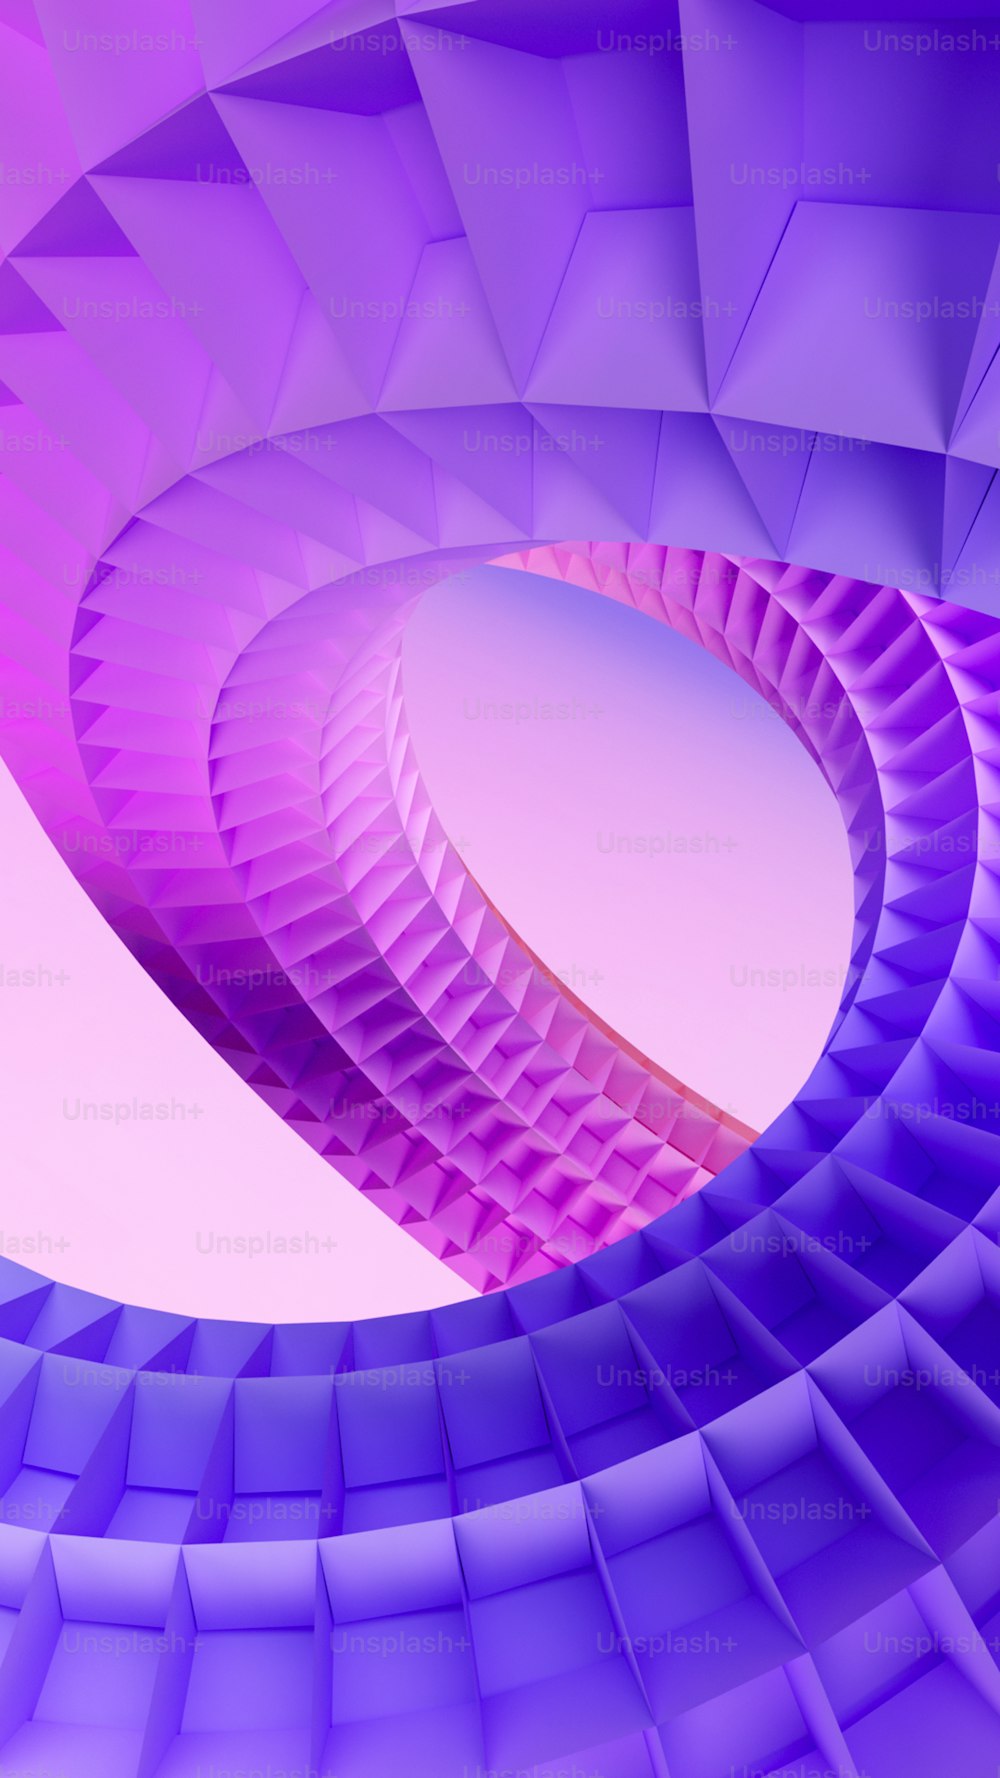 an abstract image of a spiral shaped structure